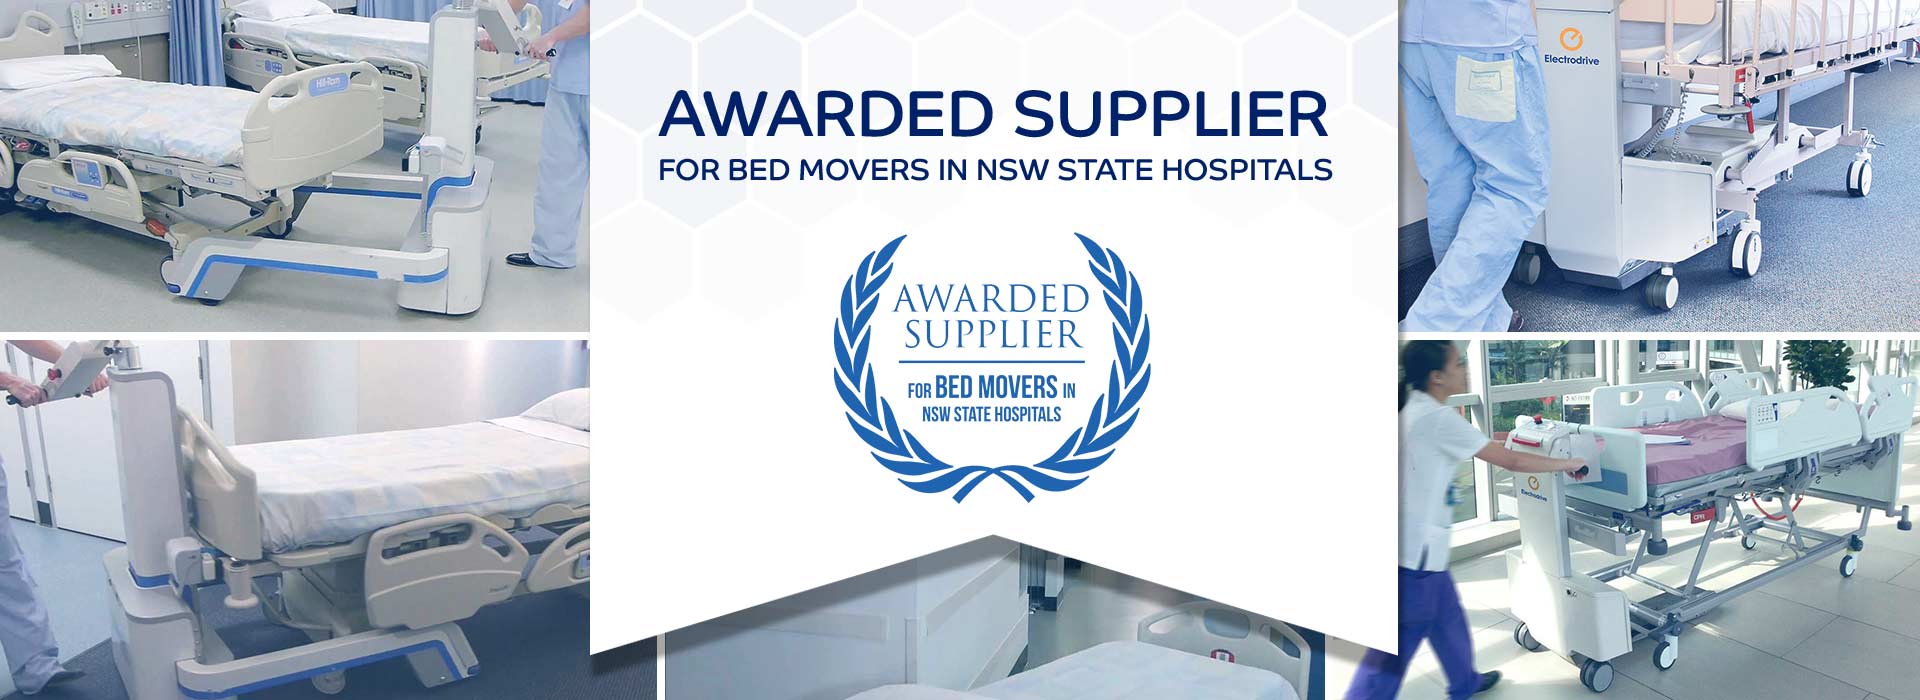 Awarded Supplier for NSW bed movers in NSW state institutions